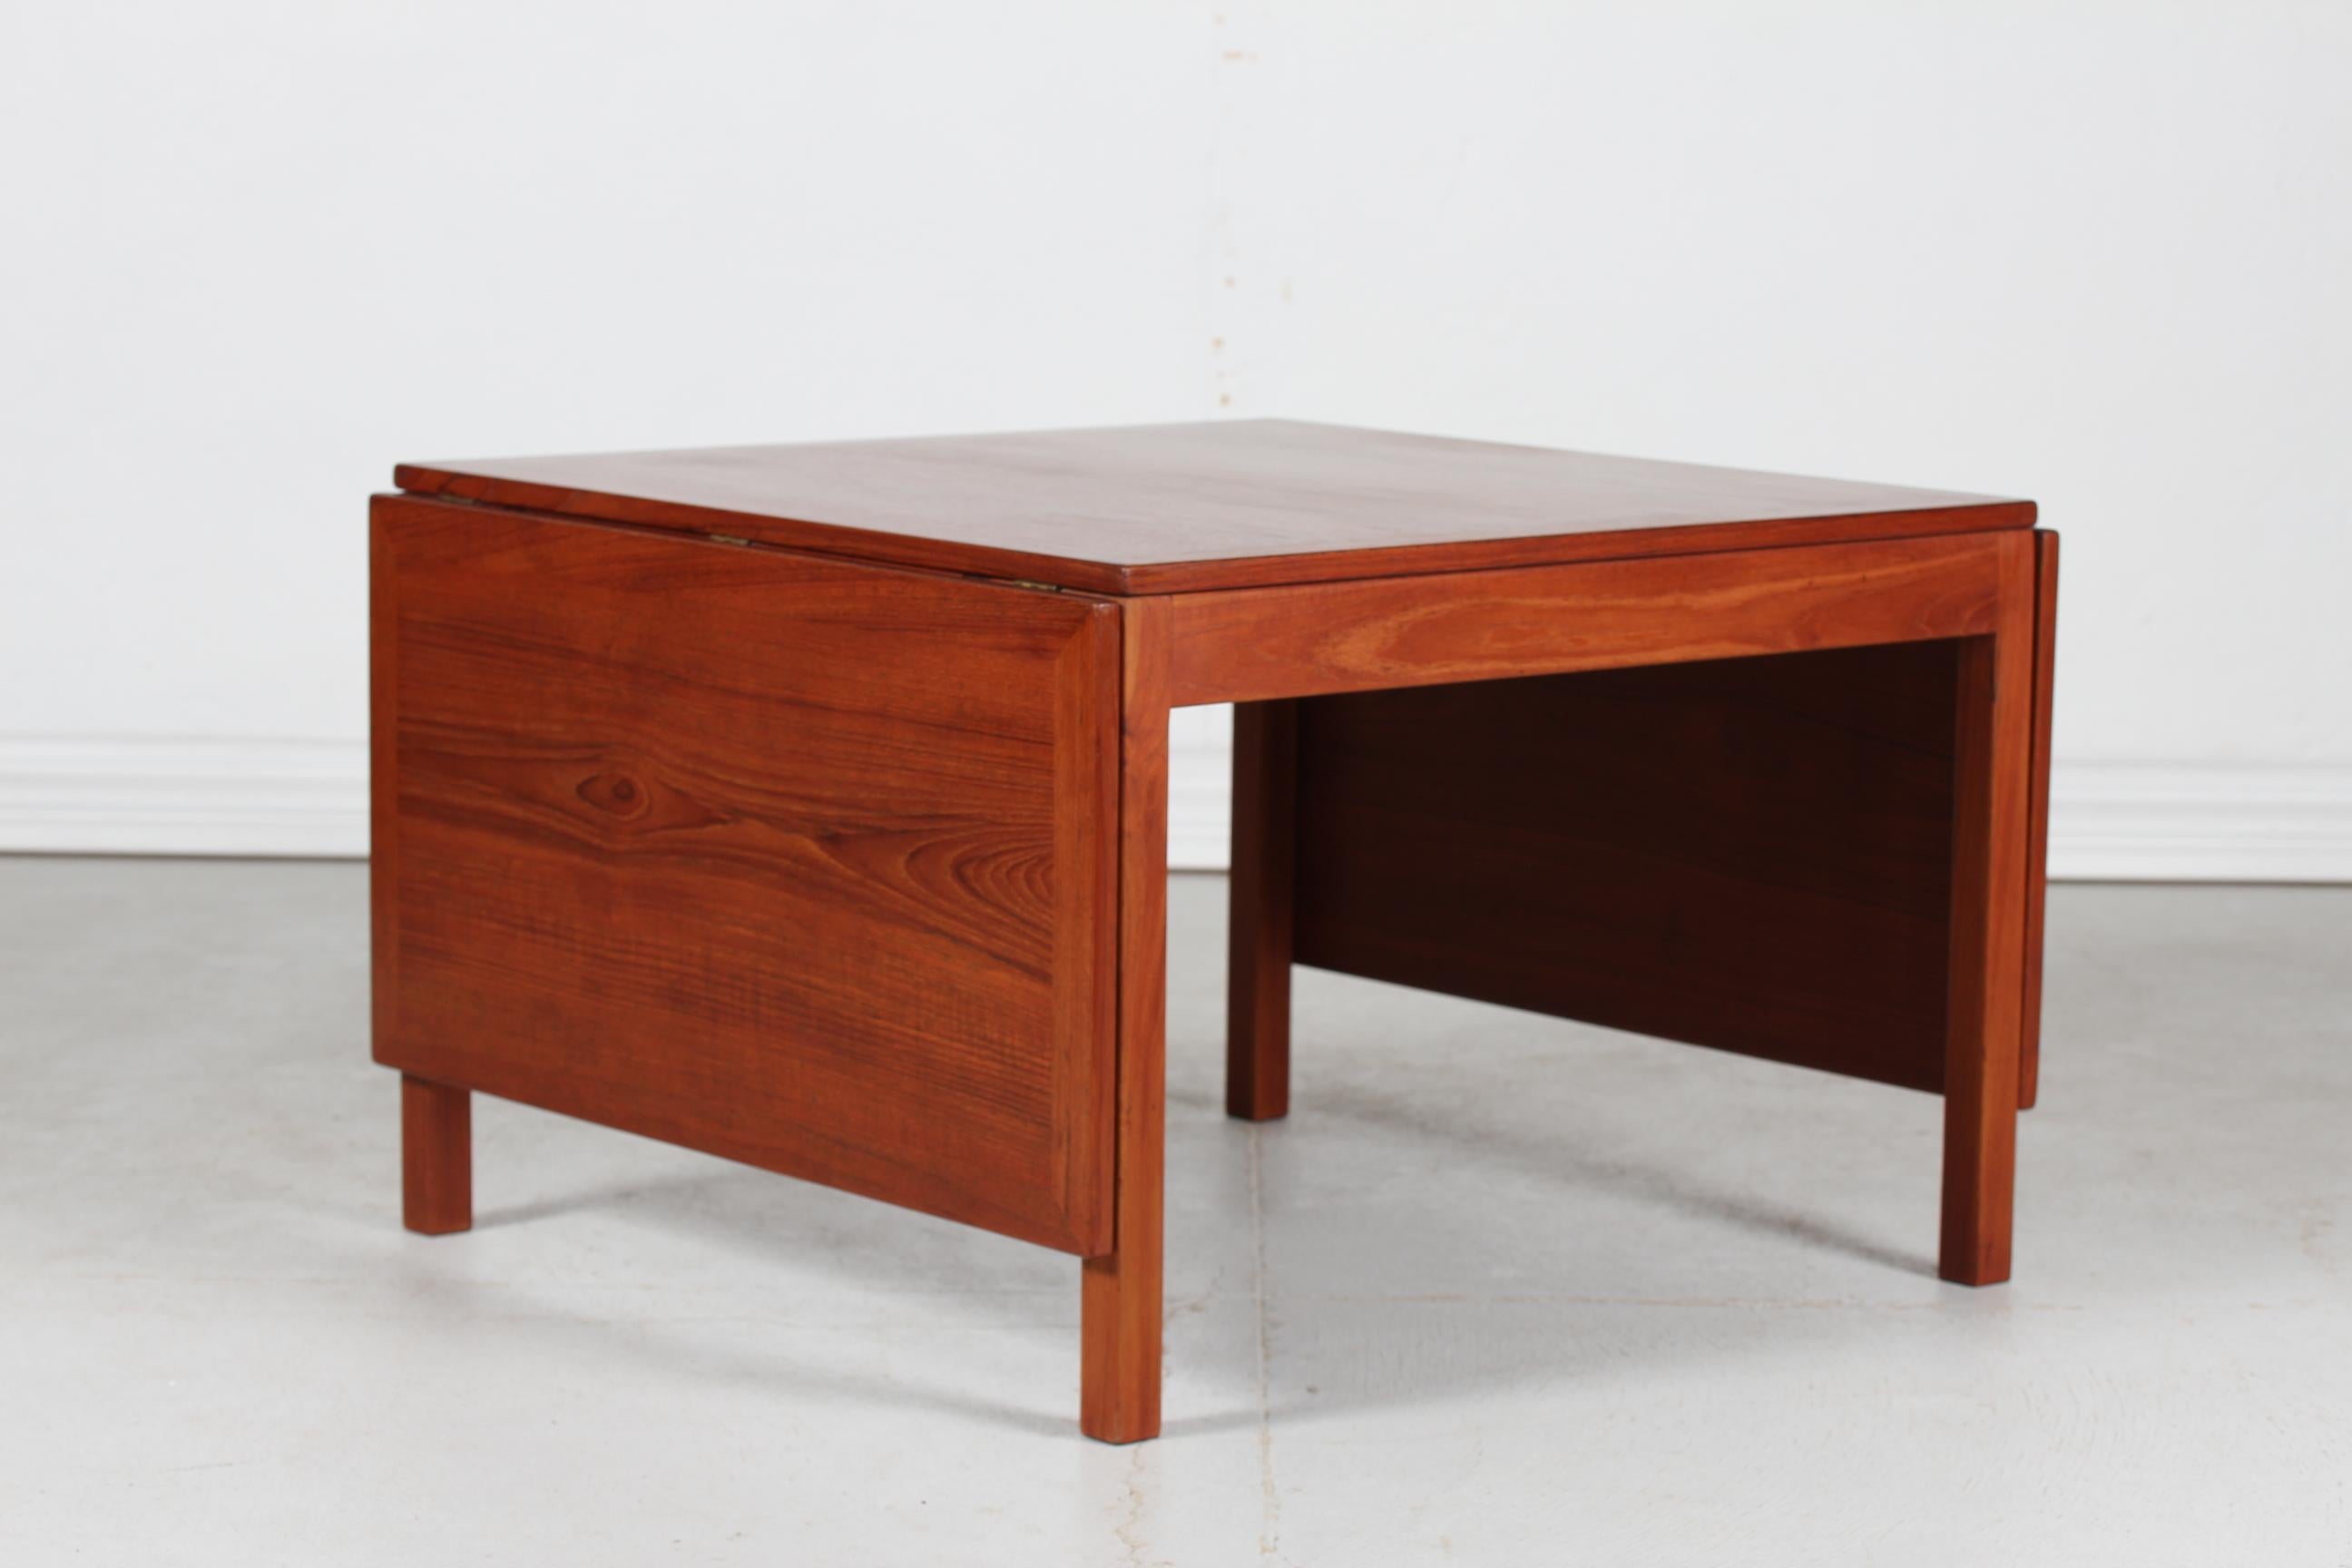 Danish vintage Børge Mogensen extendable coffee table model no. 5362 made of solid teak and teak veneer with oil treatment.

The table is made by Fredericia Stolefabrik and remains in a very good vintage condition and with beautiful